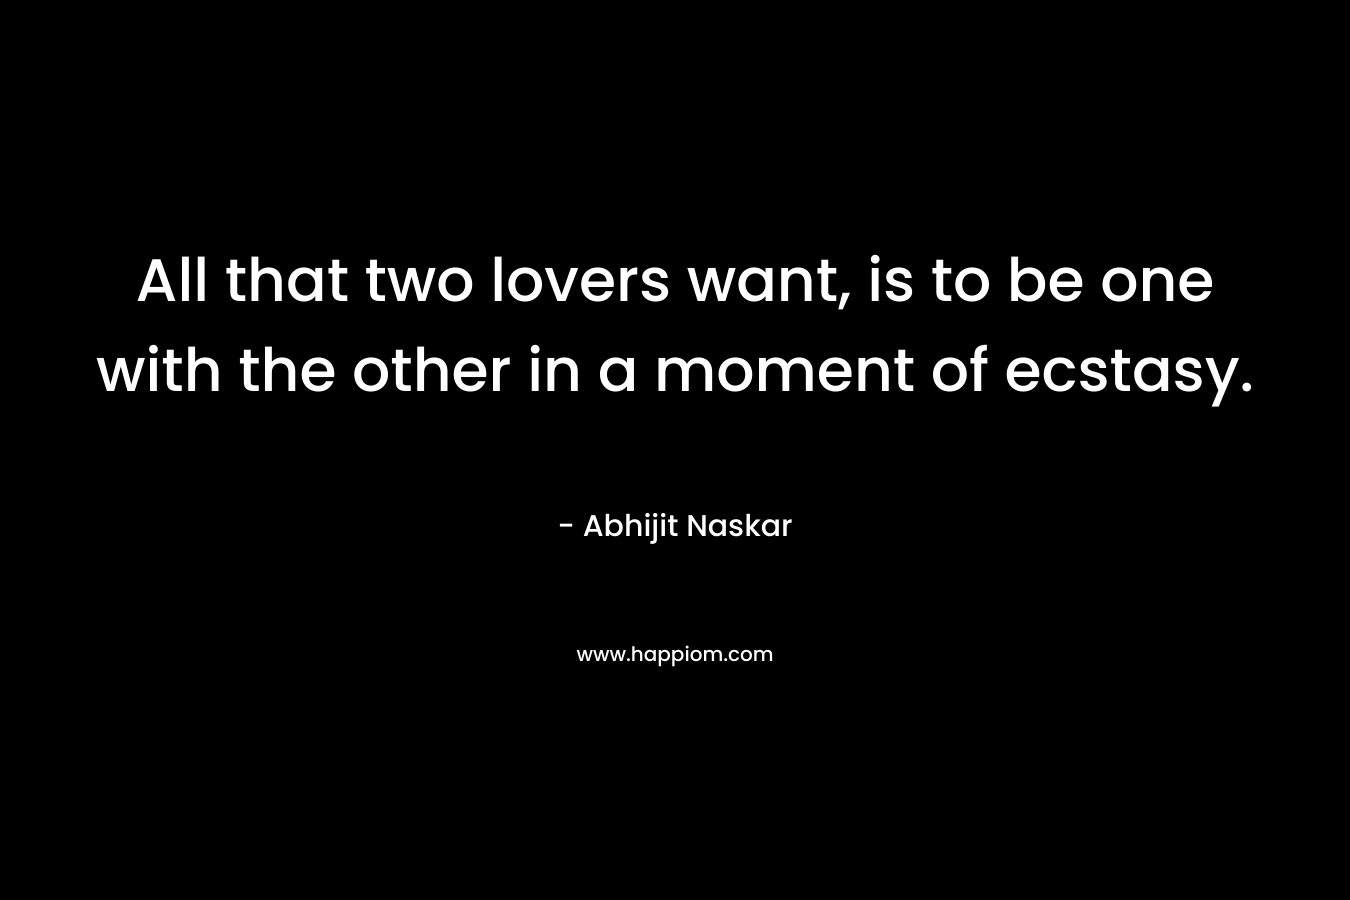 All that two lovers want, is to be one with the other in a moment of ecstasy.